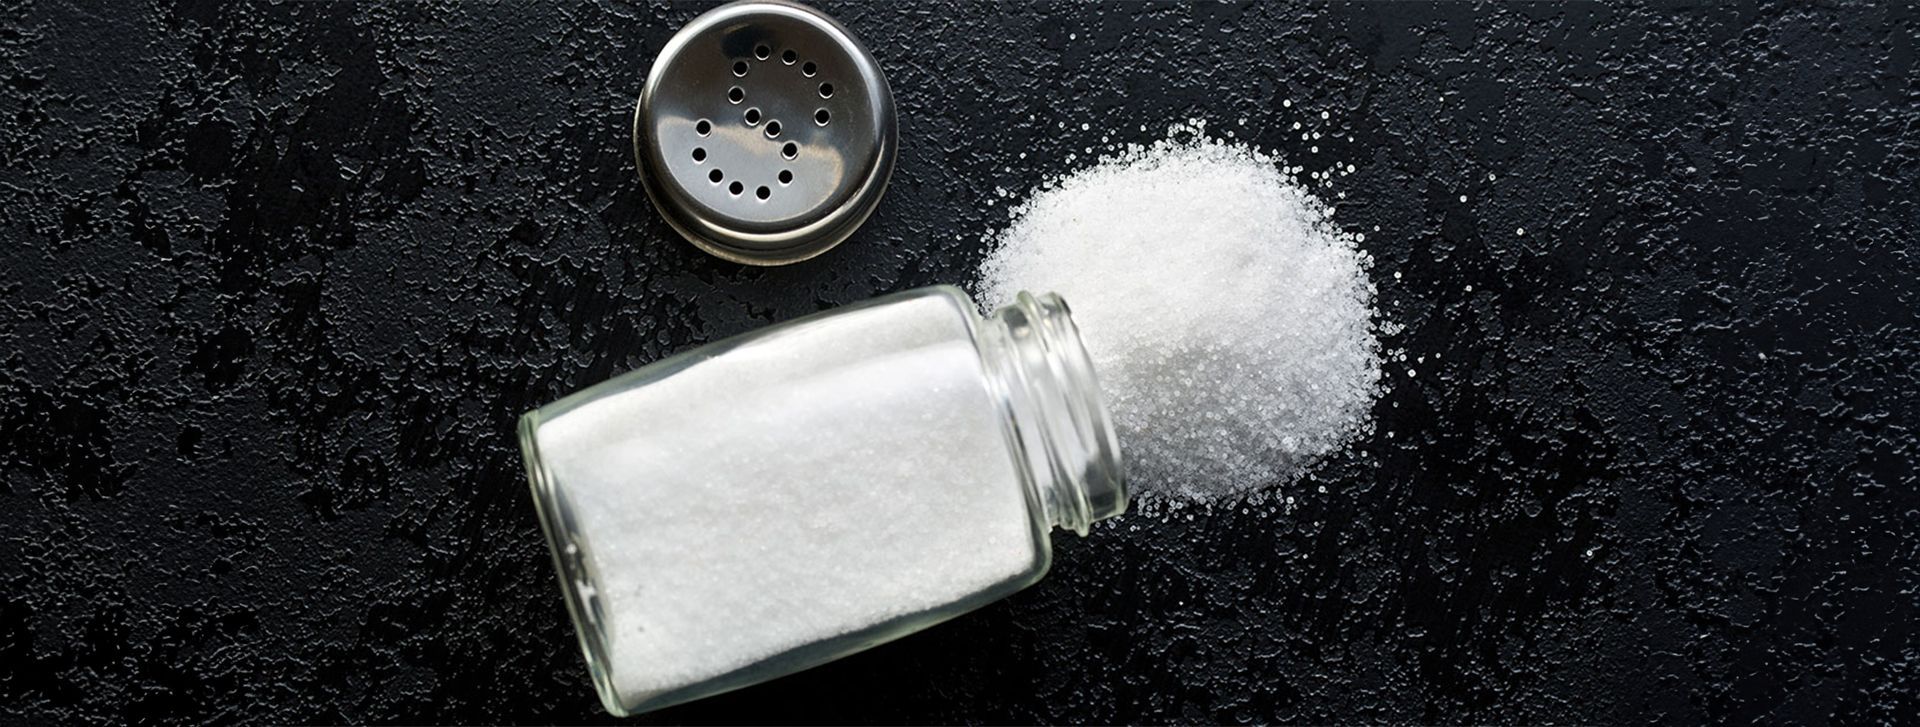 5 Ways to Cut Sodium in Your Food – and Still Make It Tasty!